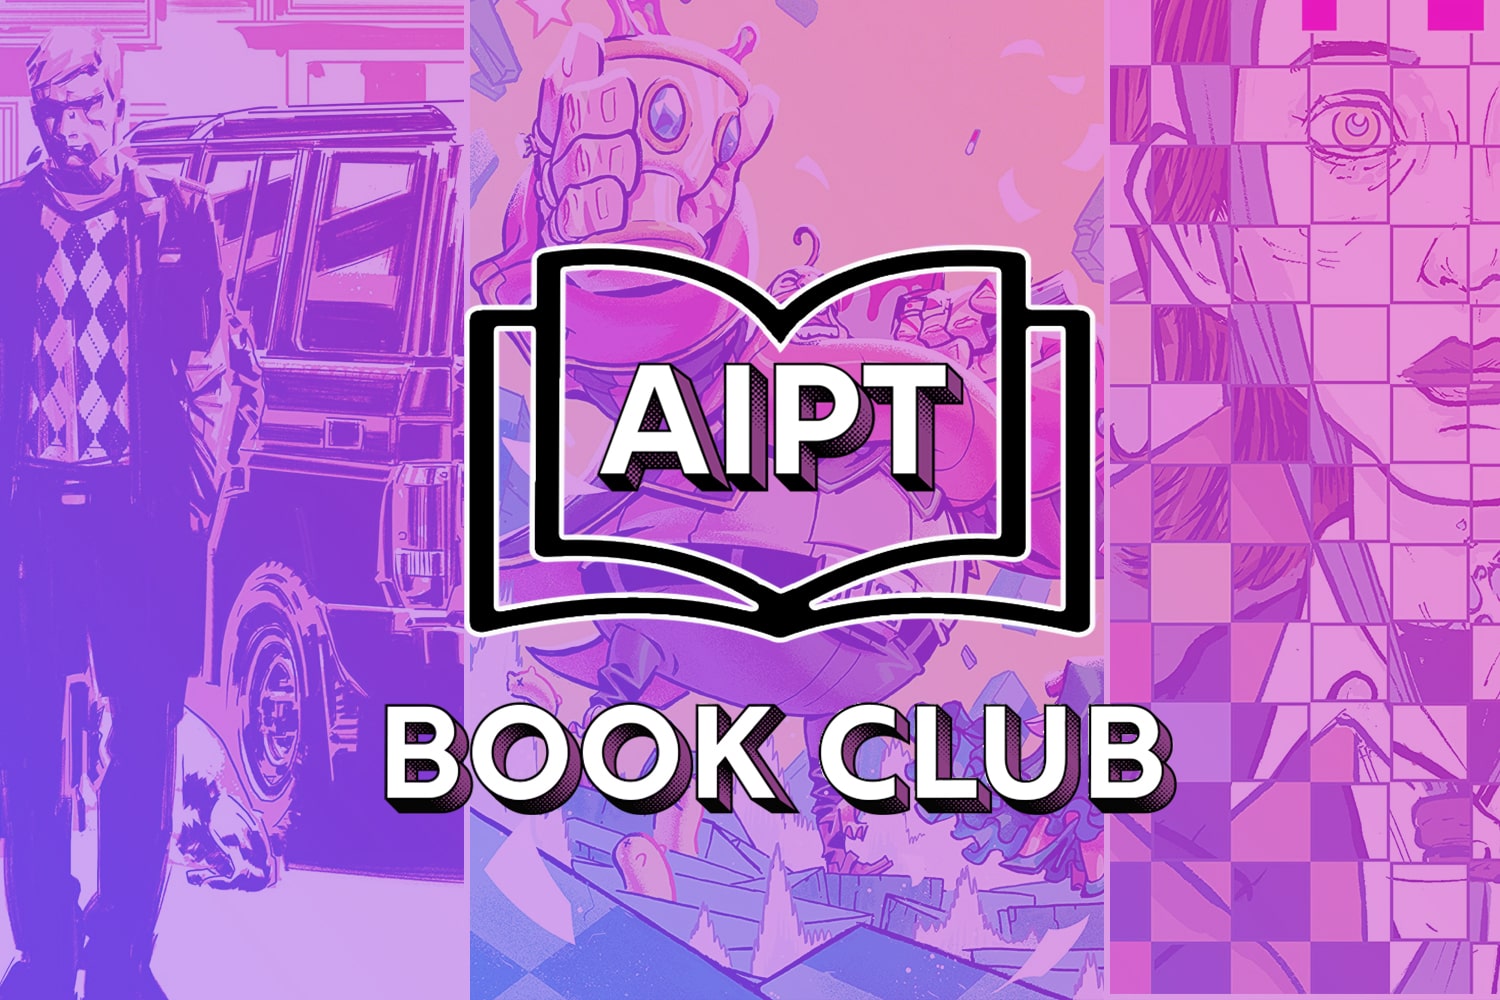 Introducing the AIPT Comic Book Club for Patreon members